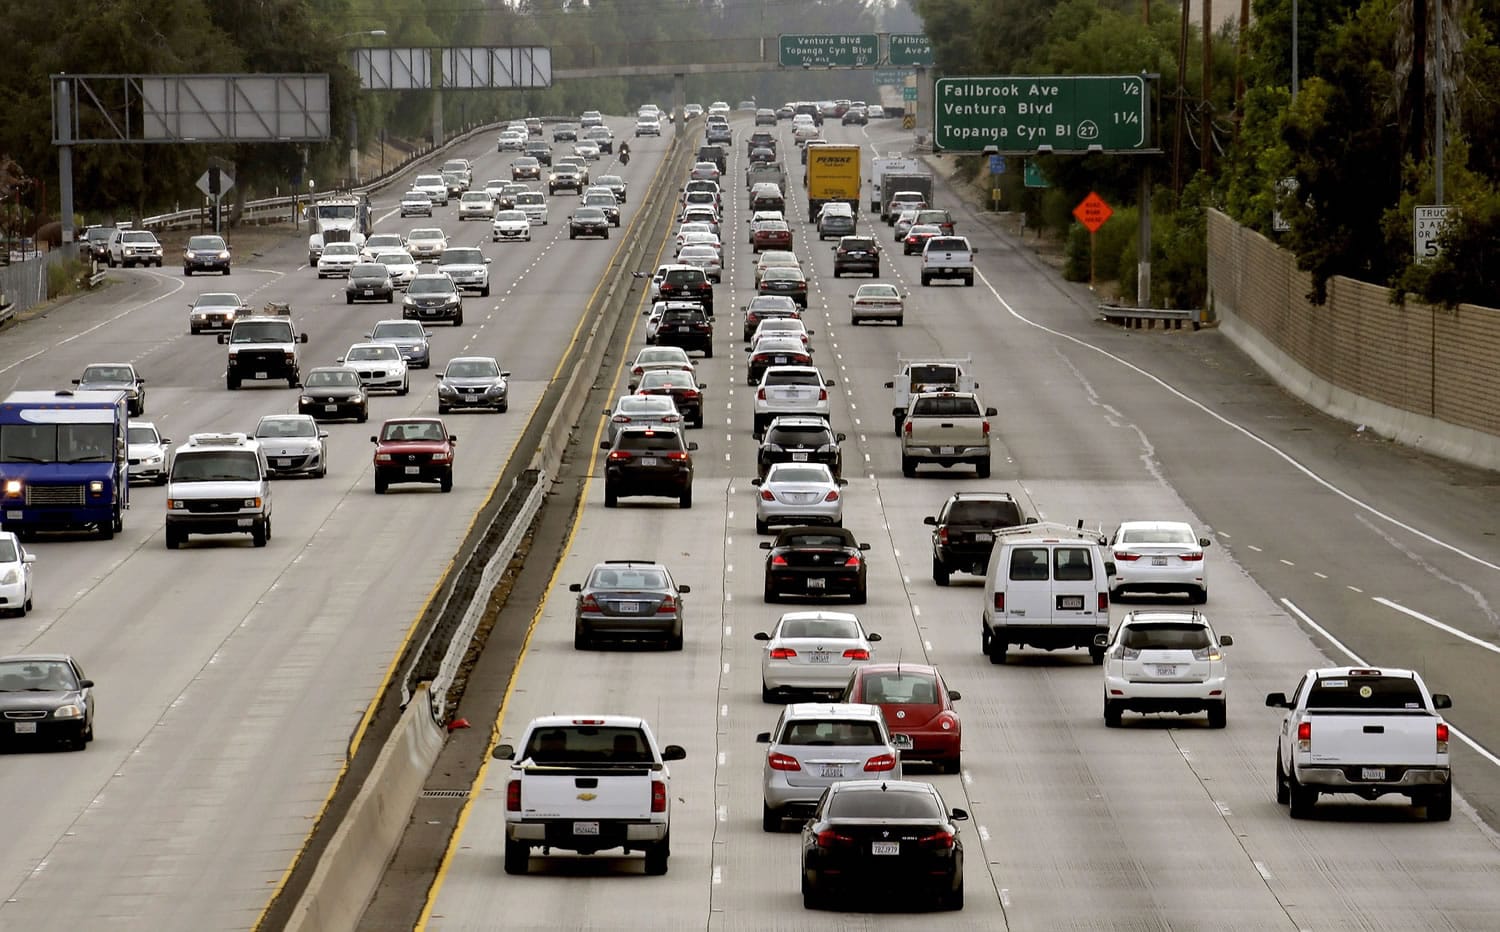 Traffic moves along the 101 Ventura Freeway on Tuesday in Los Angeles, which is No.